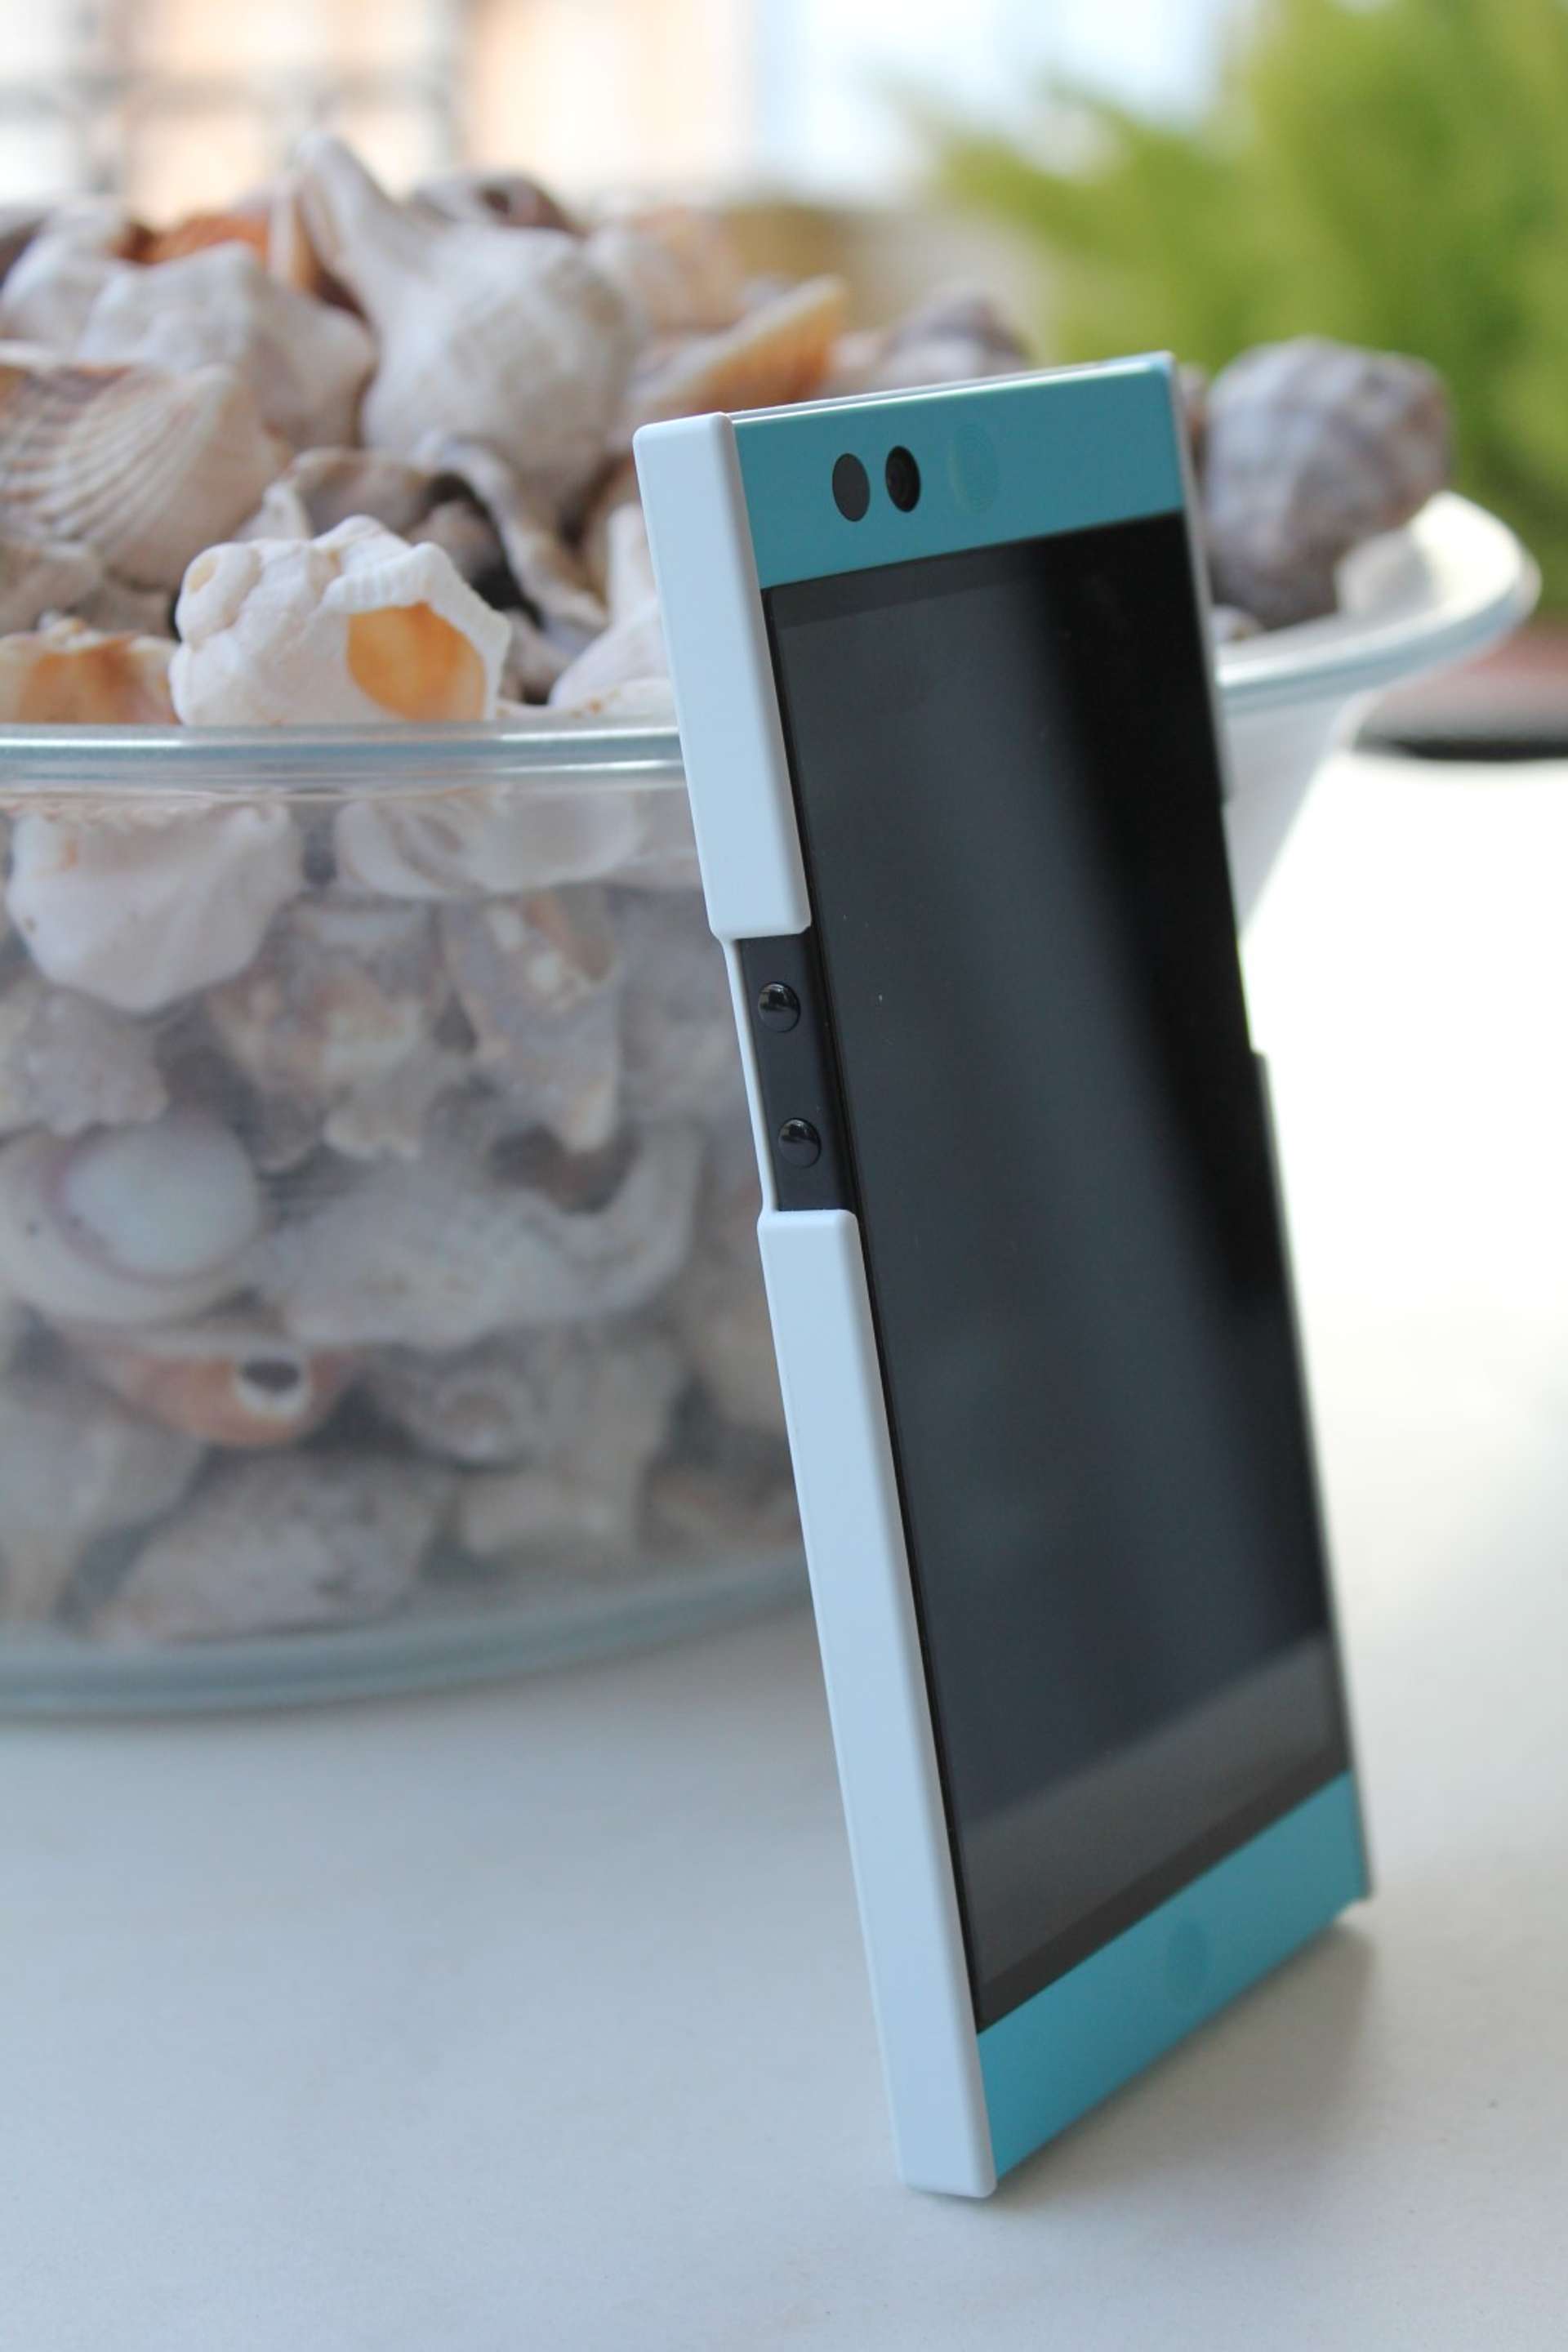 Nextbit Robin side showing the volume buttons and featuring the fog bumps case